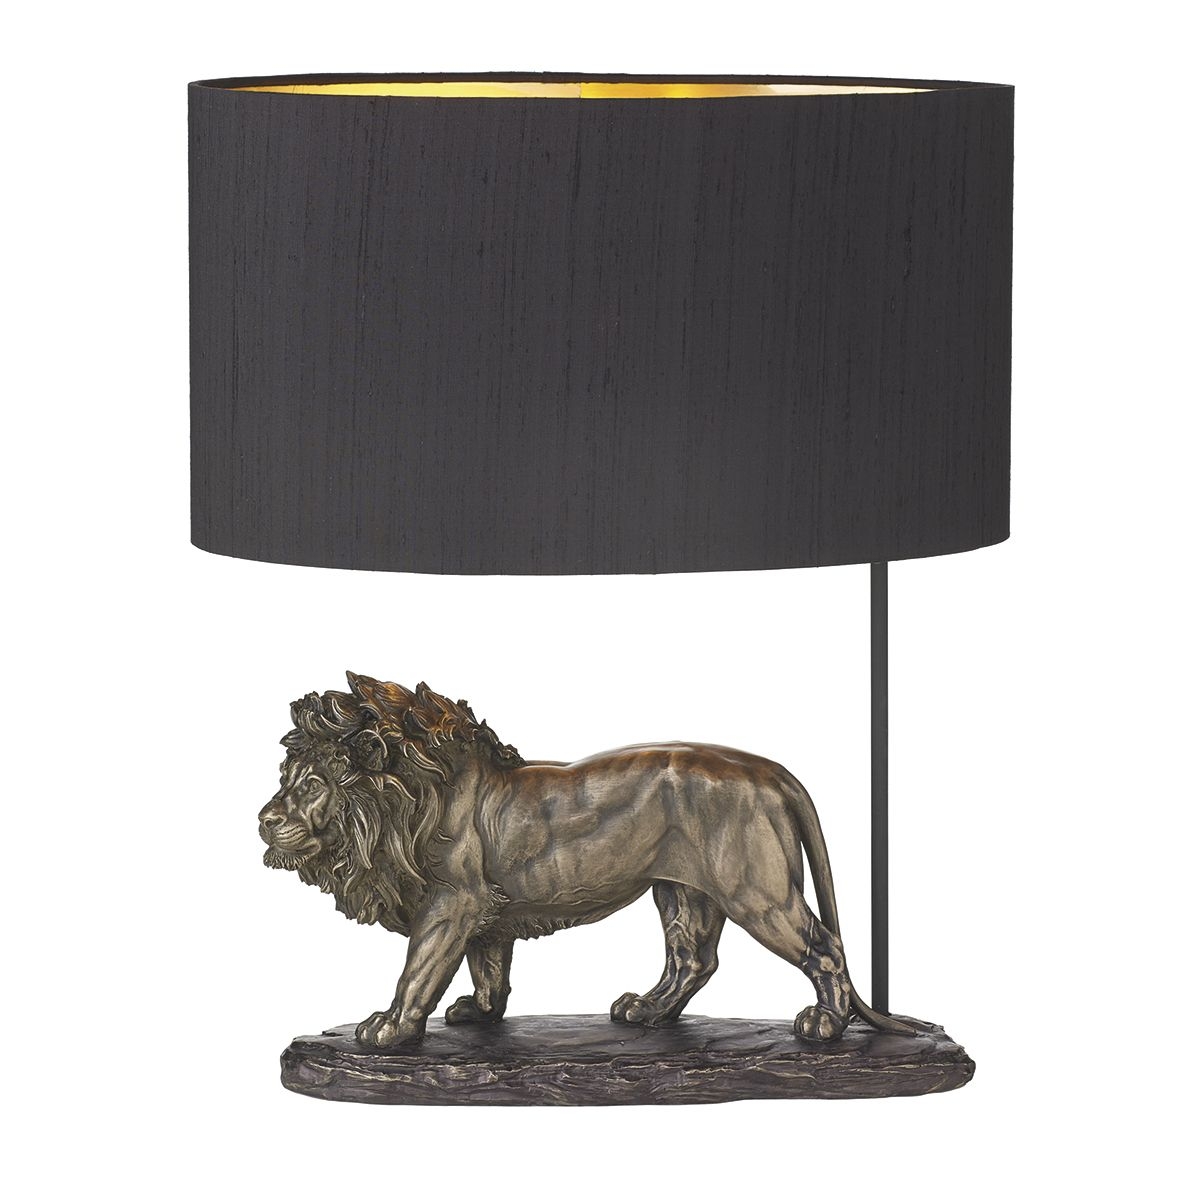 Dar lighting roy4363 royale lion bronze effect table lamp with